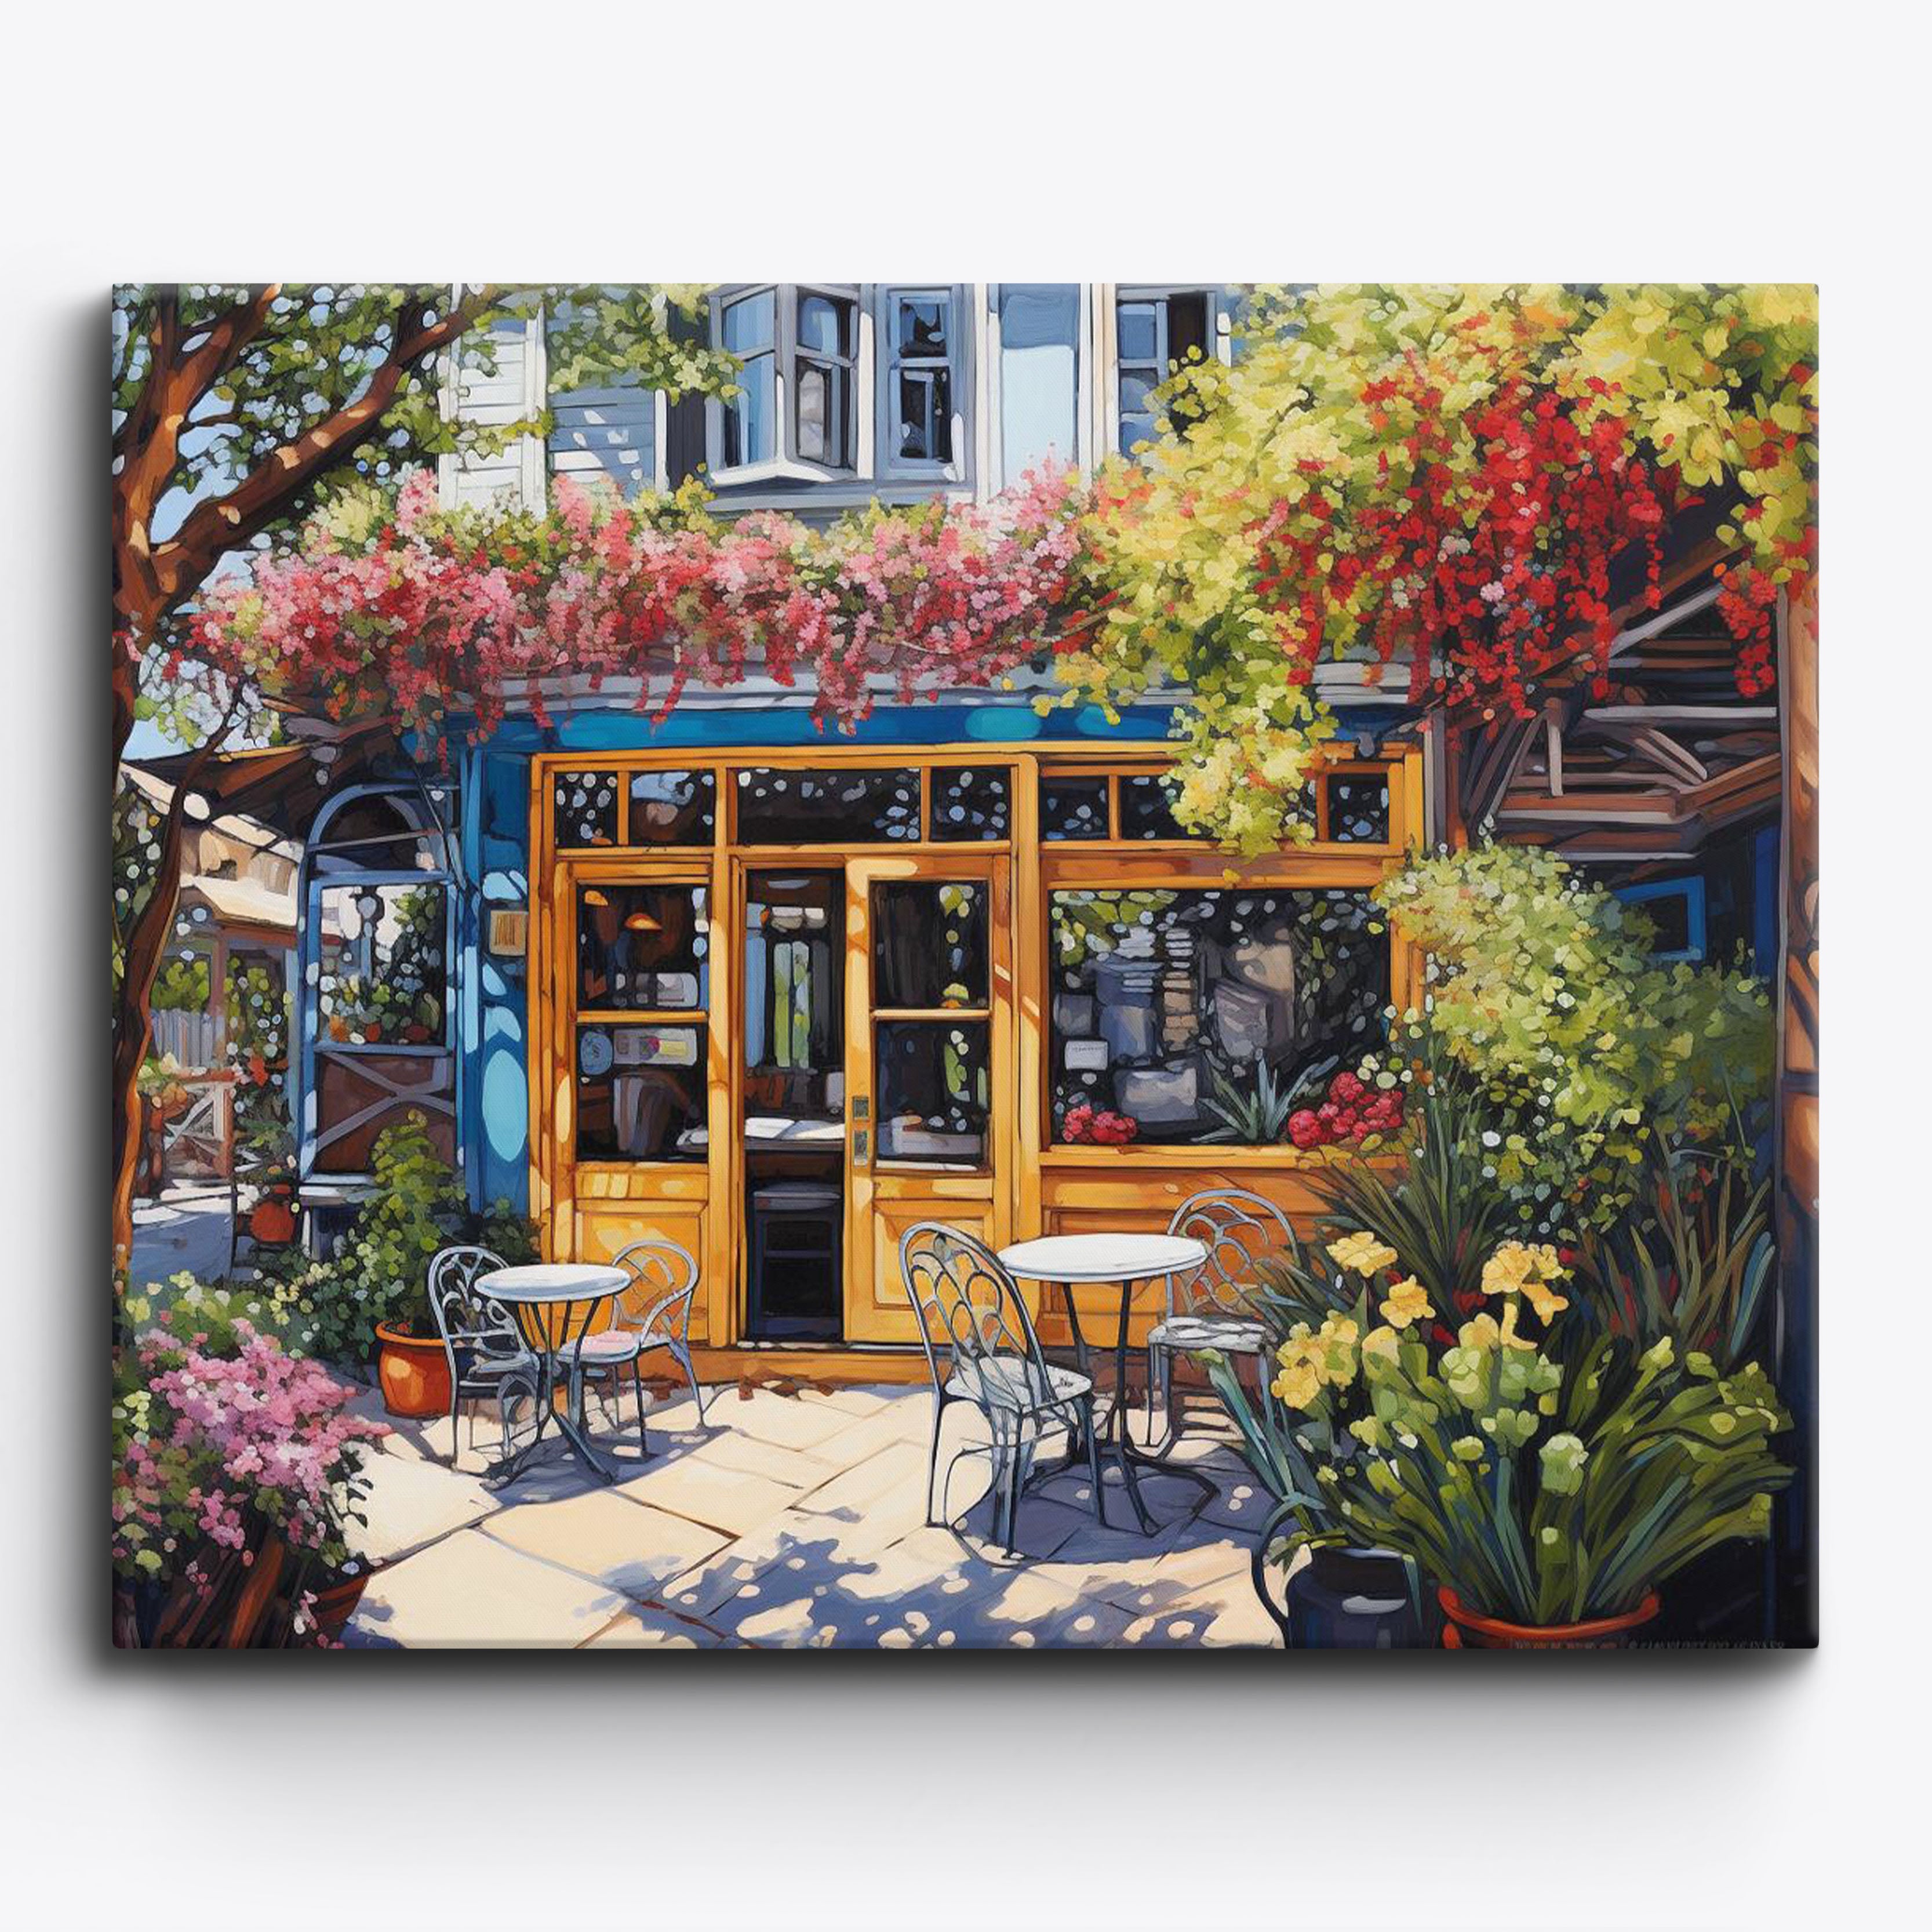 USA - DIY Paint by Number Kit Acrylic Oil Painting Home Decor - Cafe  Terrace